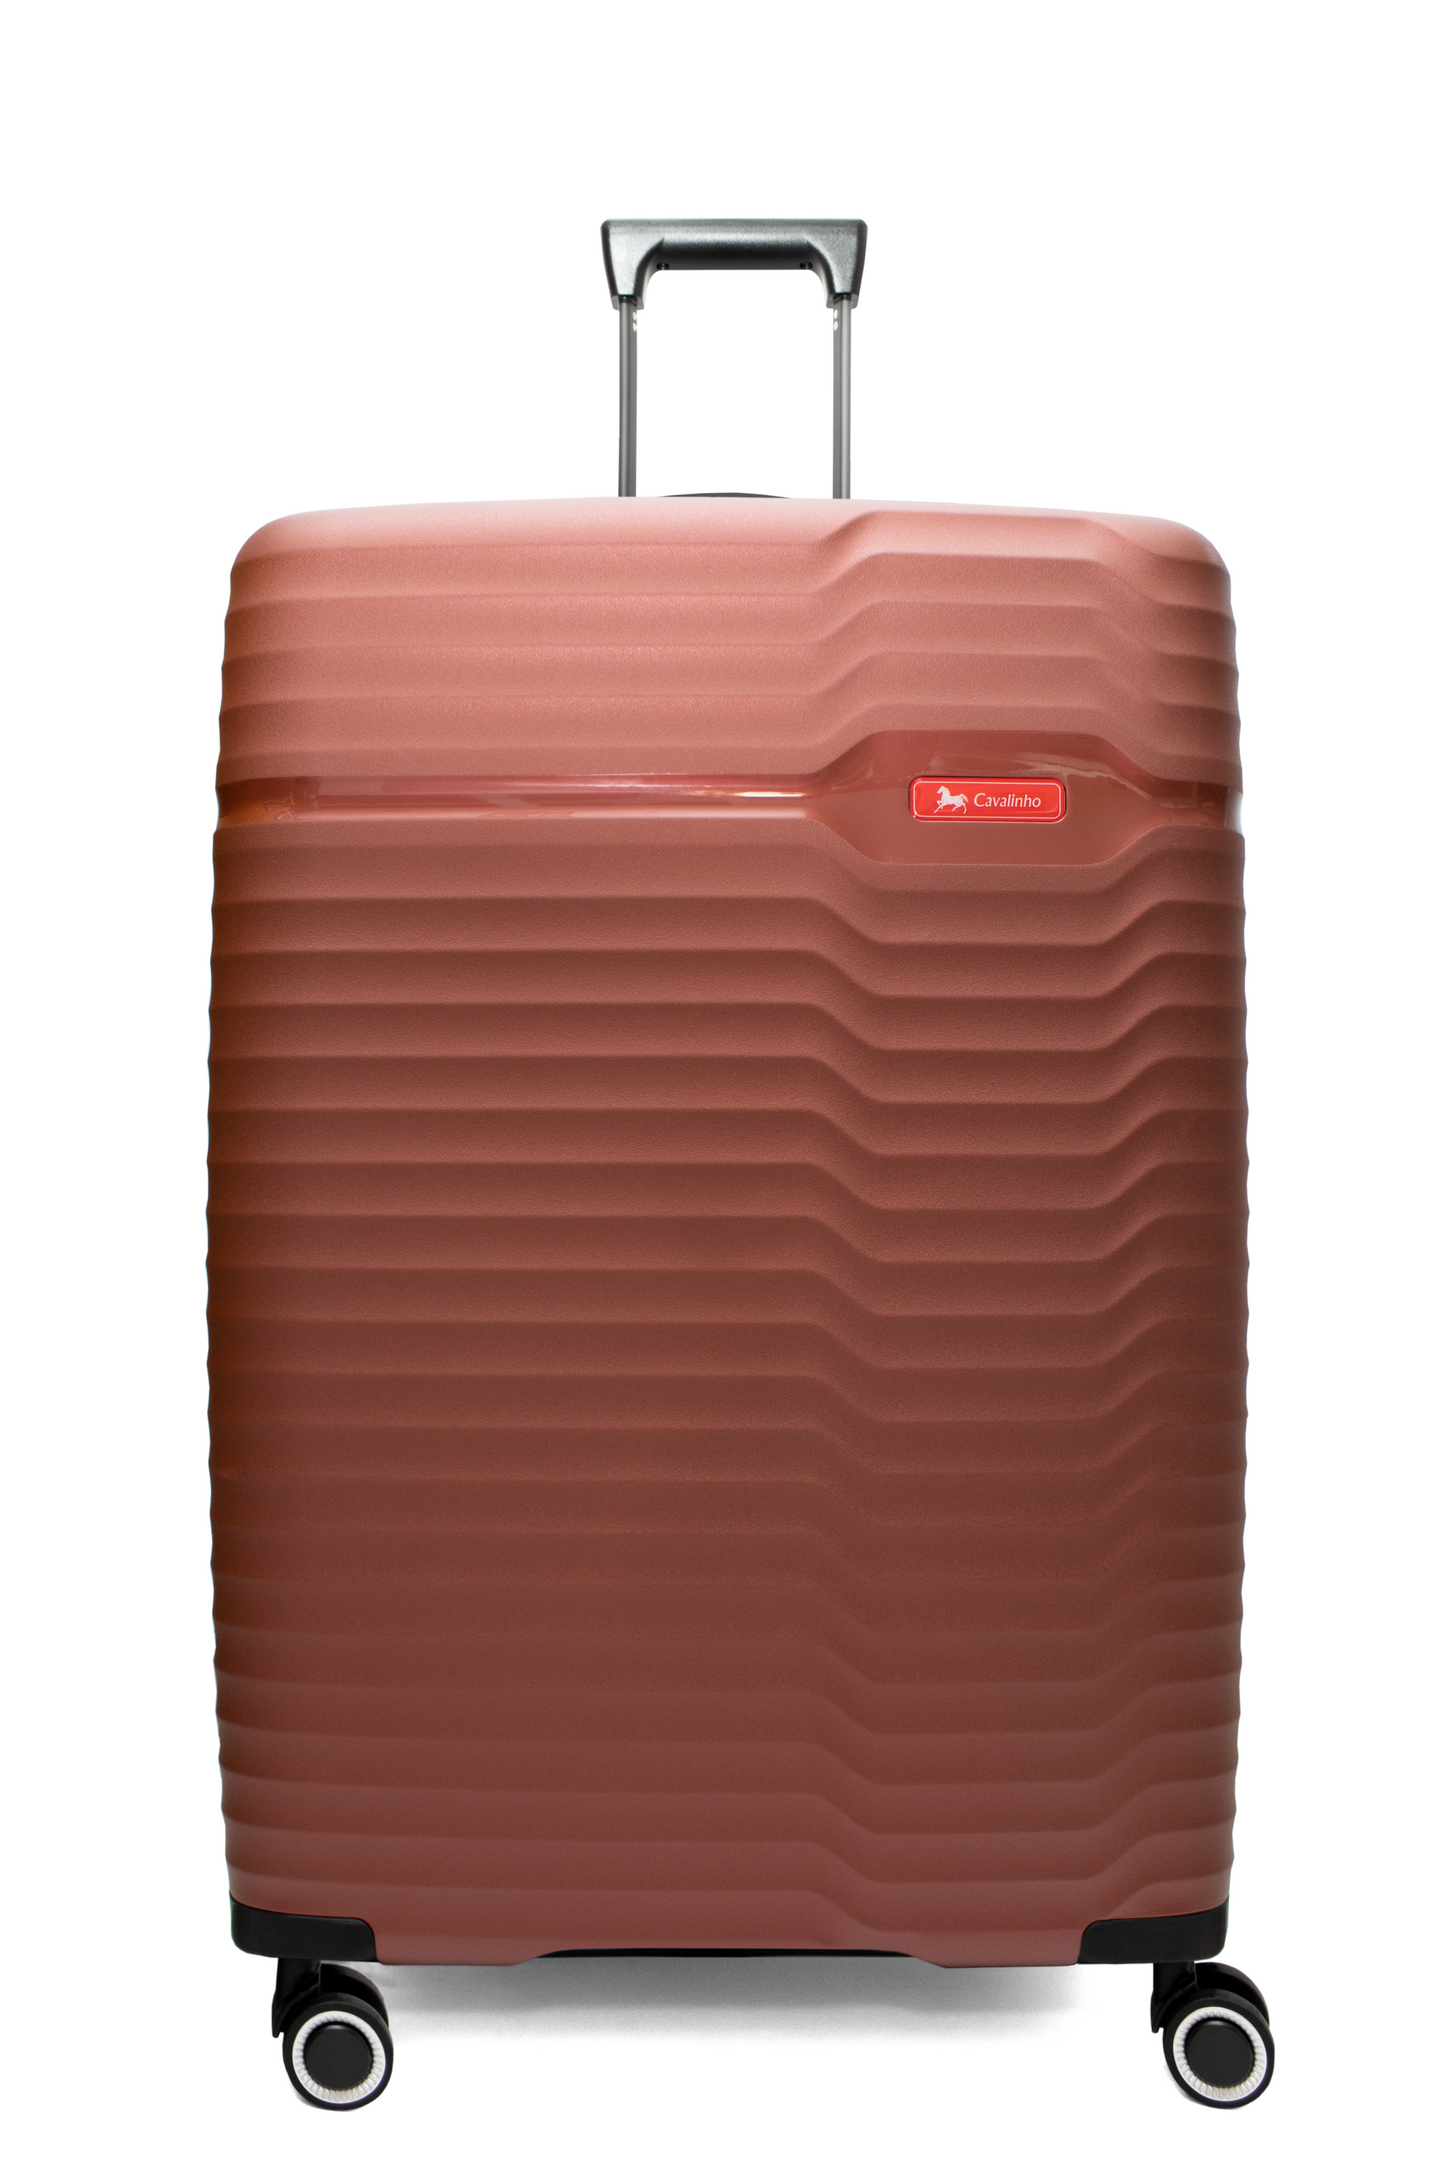 Cavalinho Check-in Hardside Luggage (24" or 28") - 28 inch IndianRed - 68010003.24.28_1